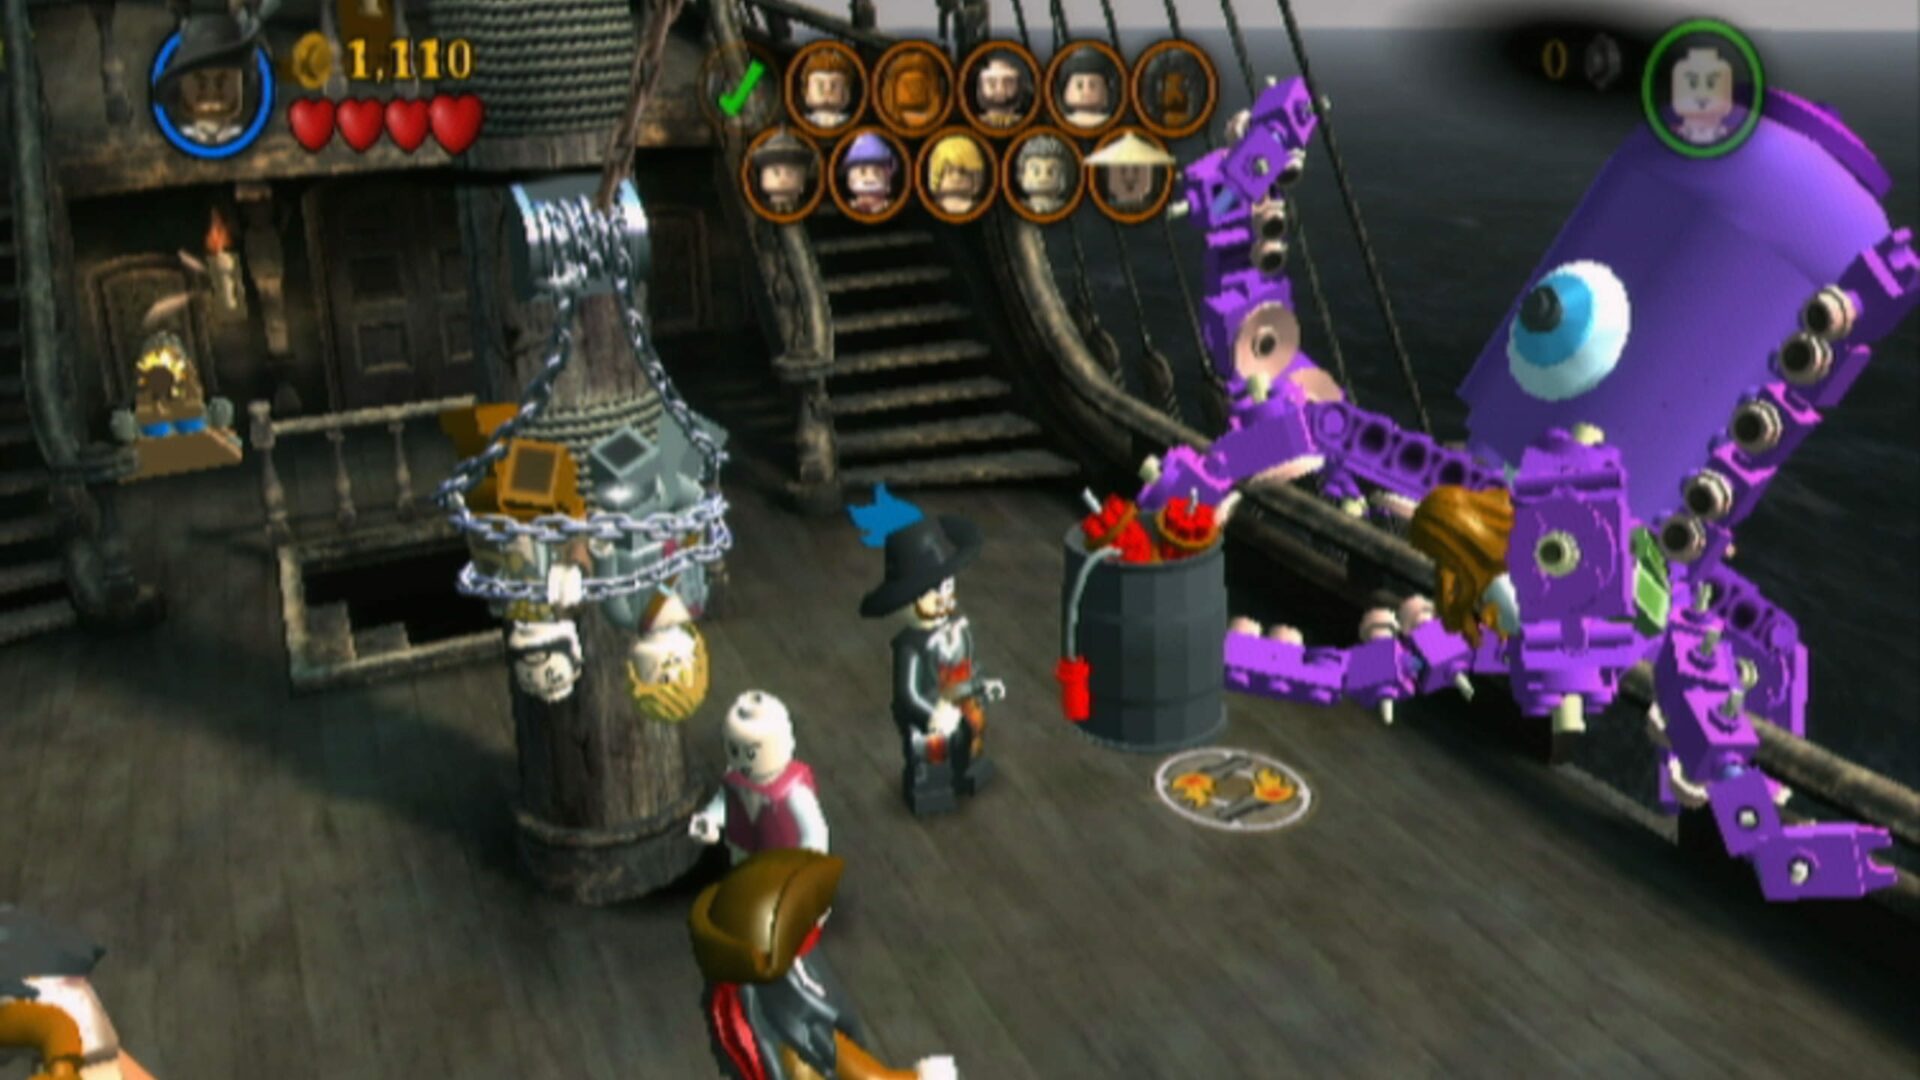 Buy Lego Pirates of the Caribbean Steam